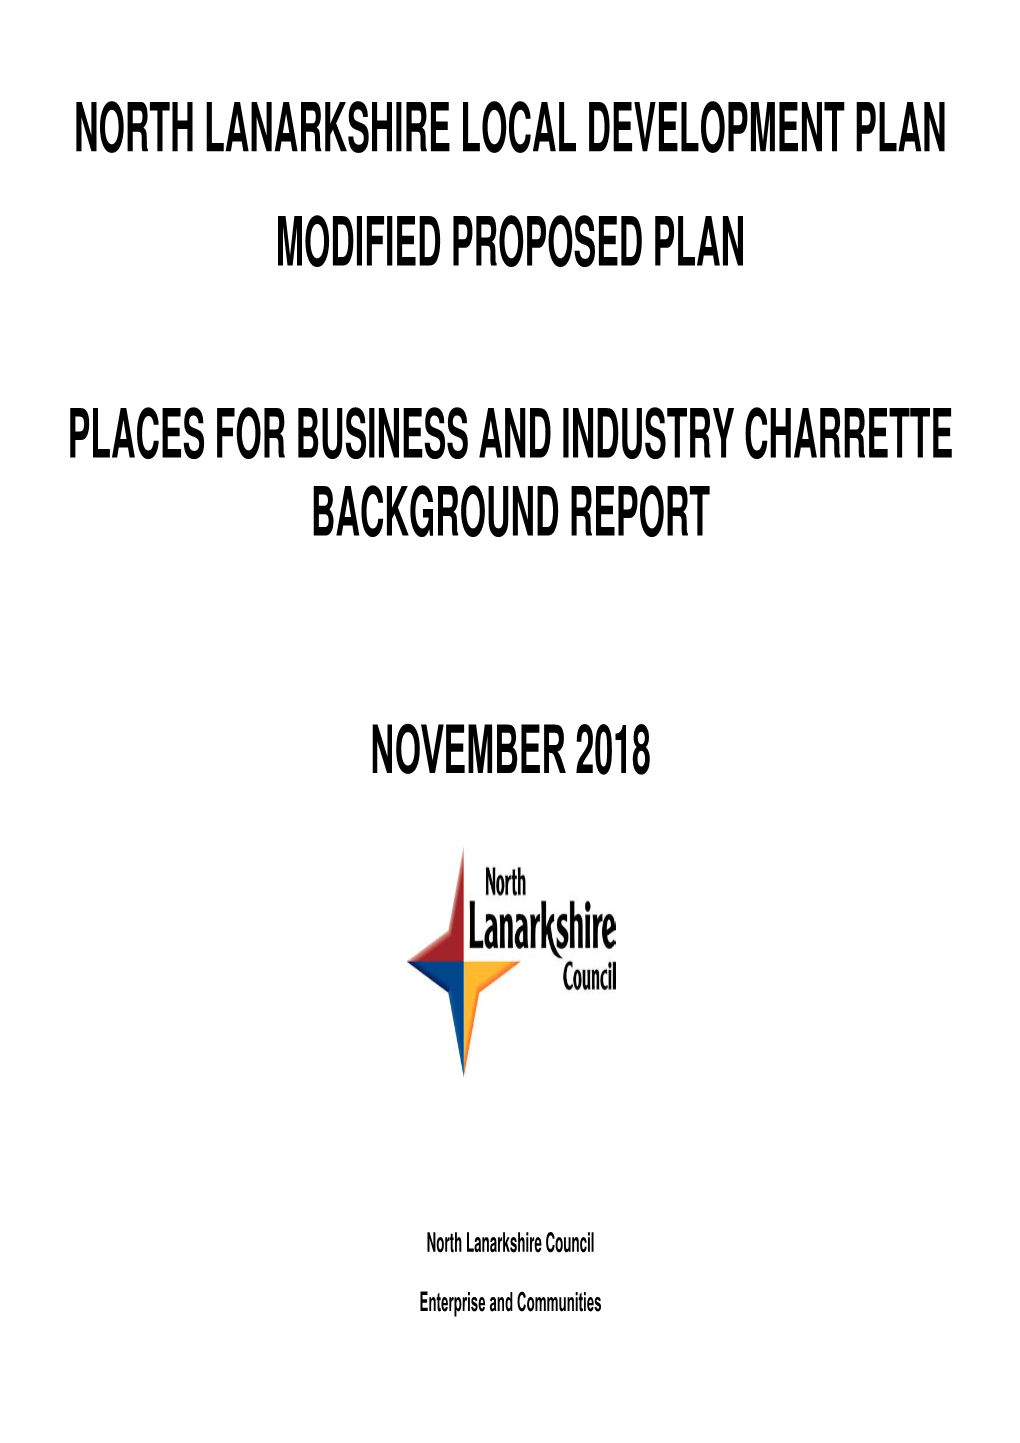 Places for Business and Industry Charrette Background Report